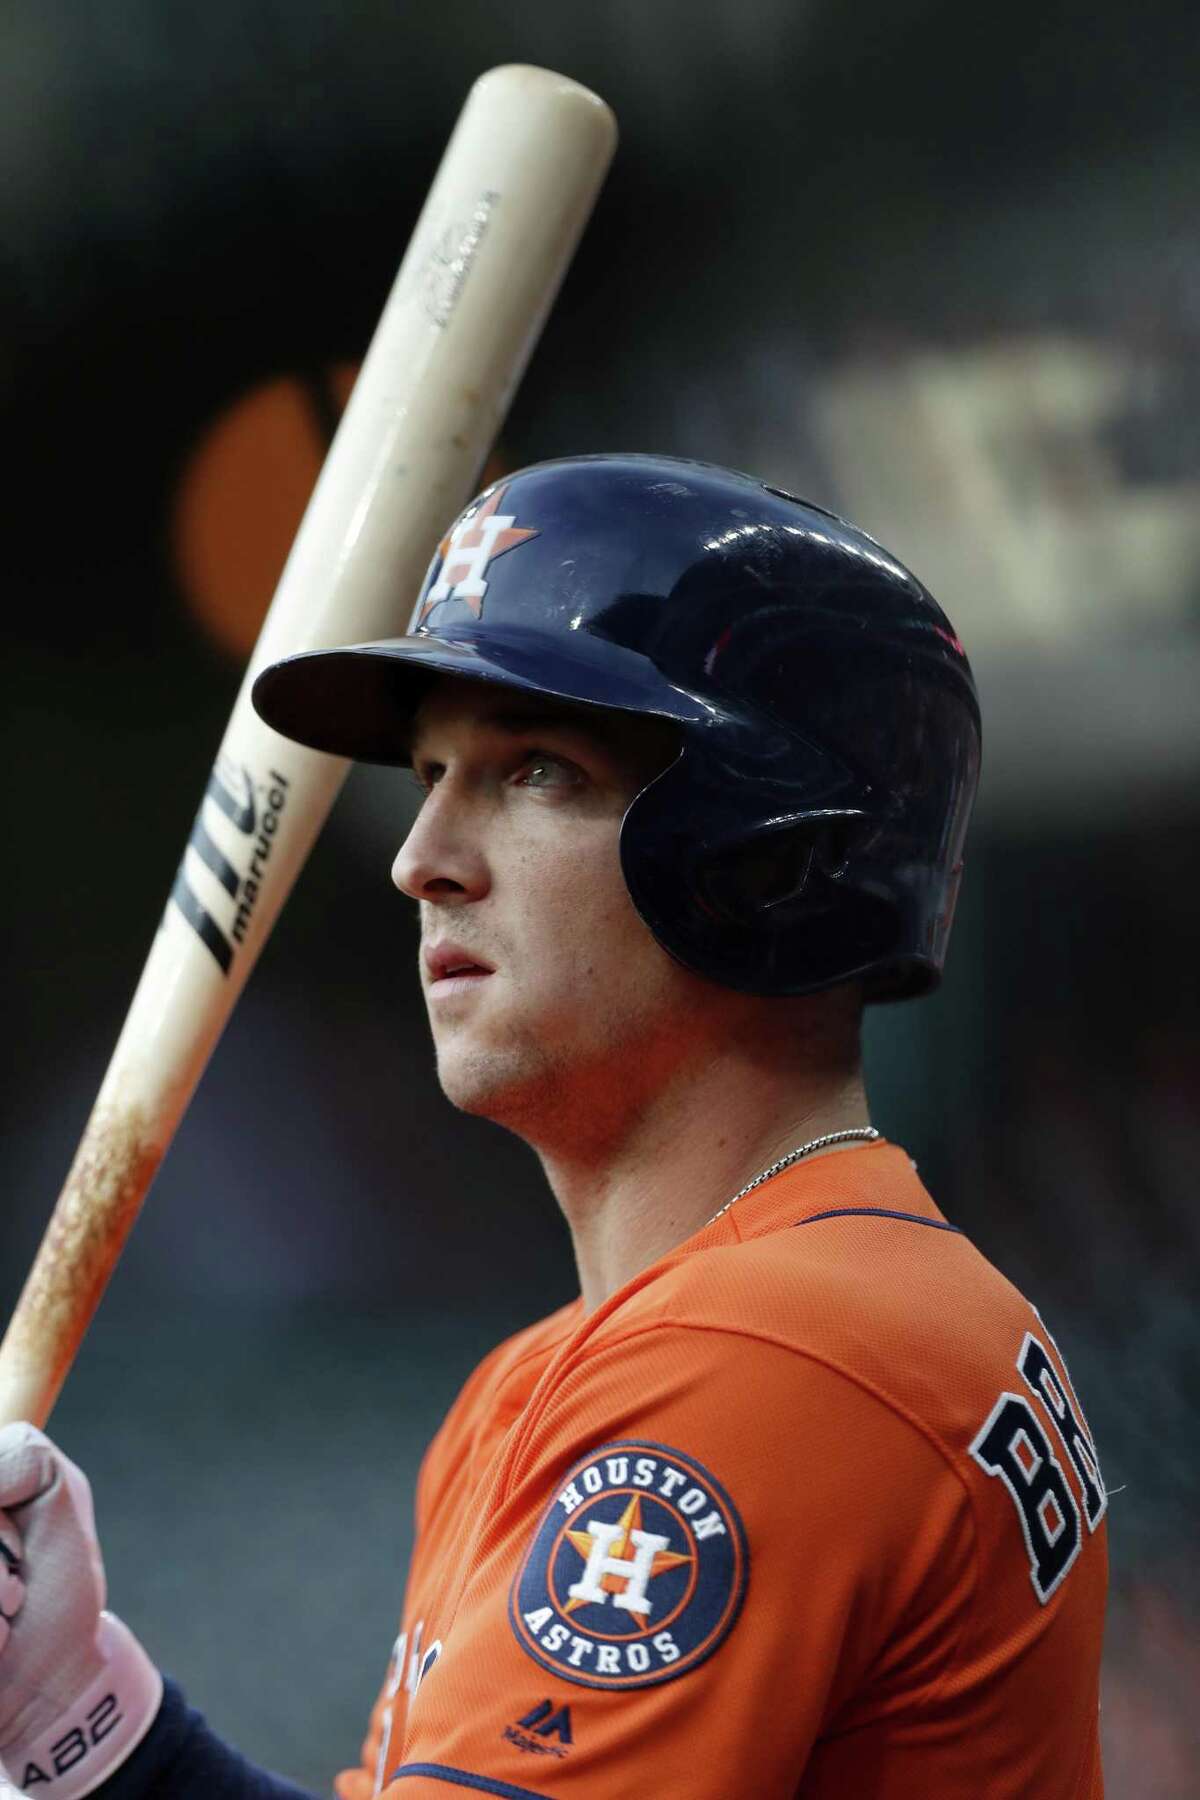 In blossoming into a major league star, the Astros’ Alex Bregman has spent countless hours with bat in hand as a “cage rat.”